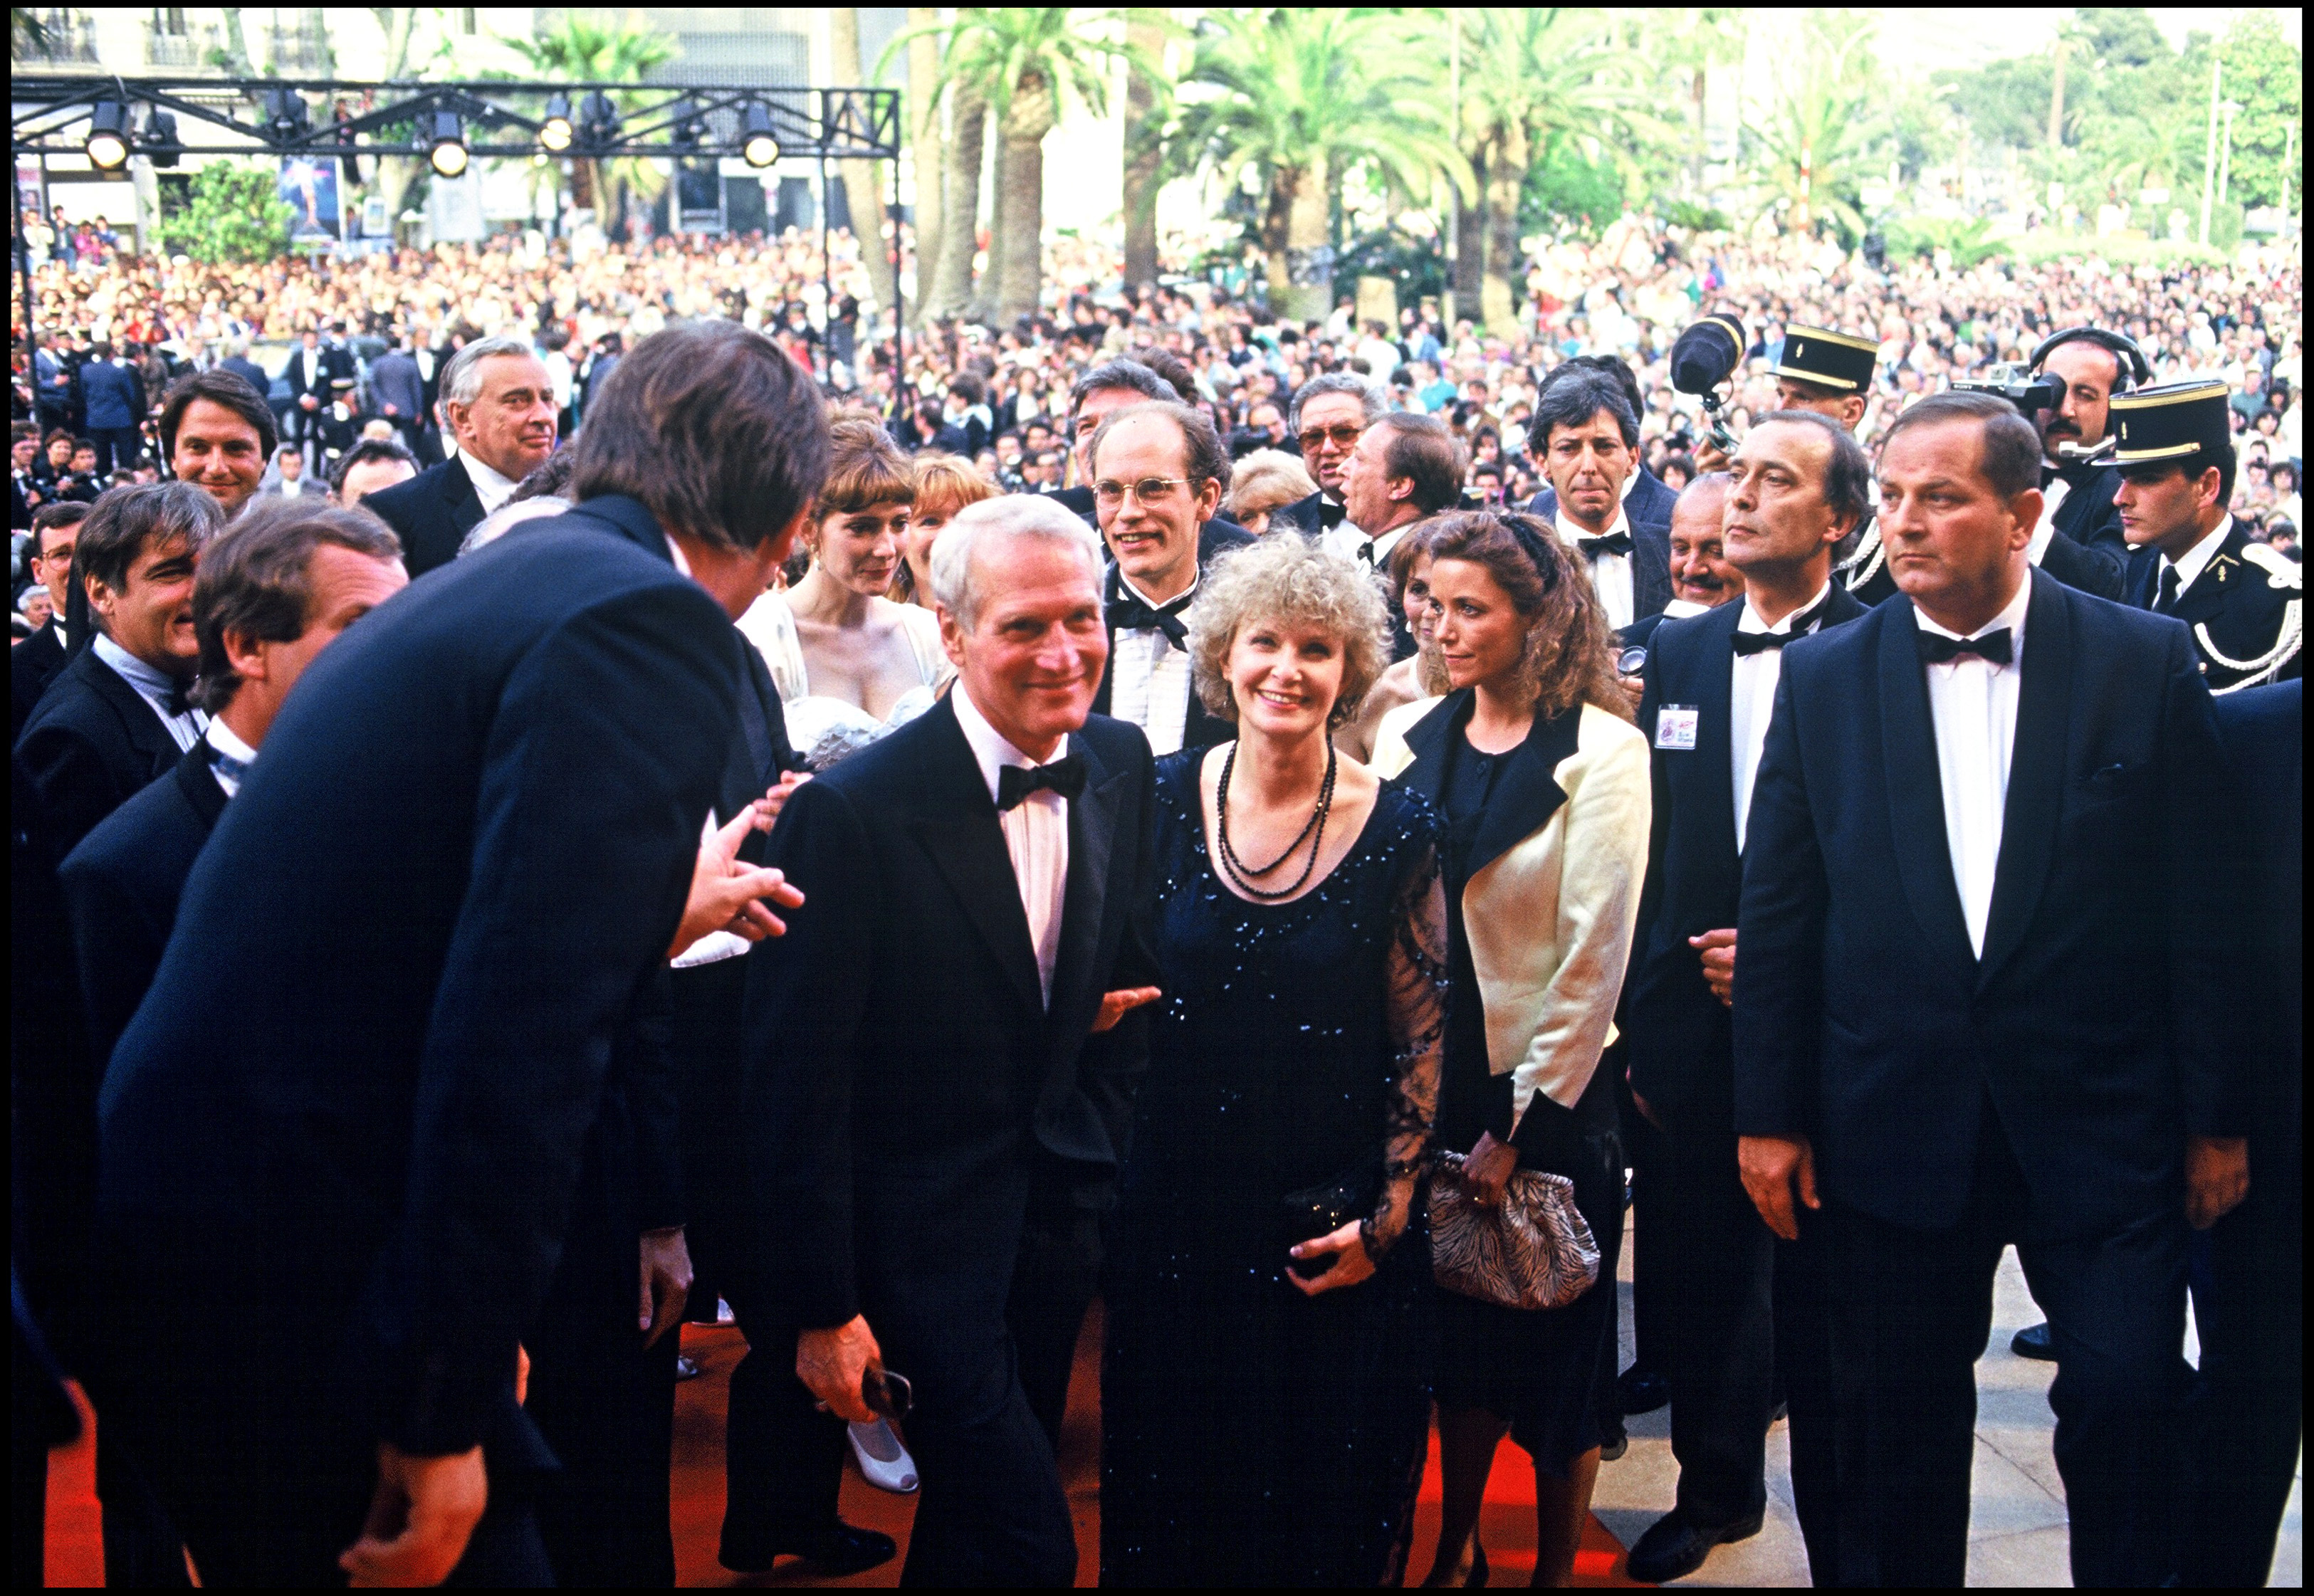 Paul Newman and Joanne Woodward walk the red carpet at the 1987 International Cannes Film Festival. (Bertrand Rindoff Petroff/Getty Images)